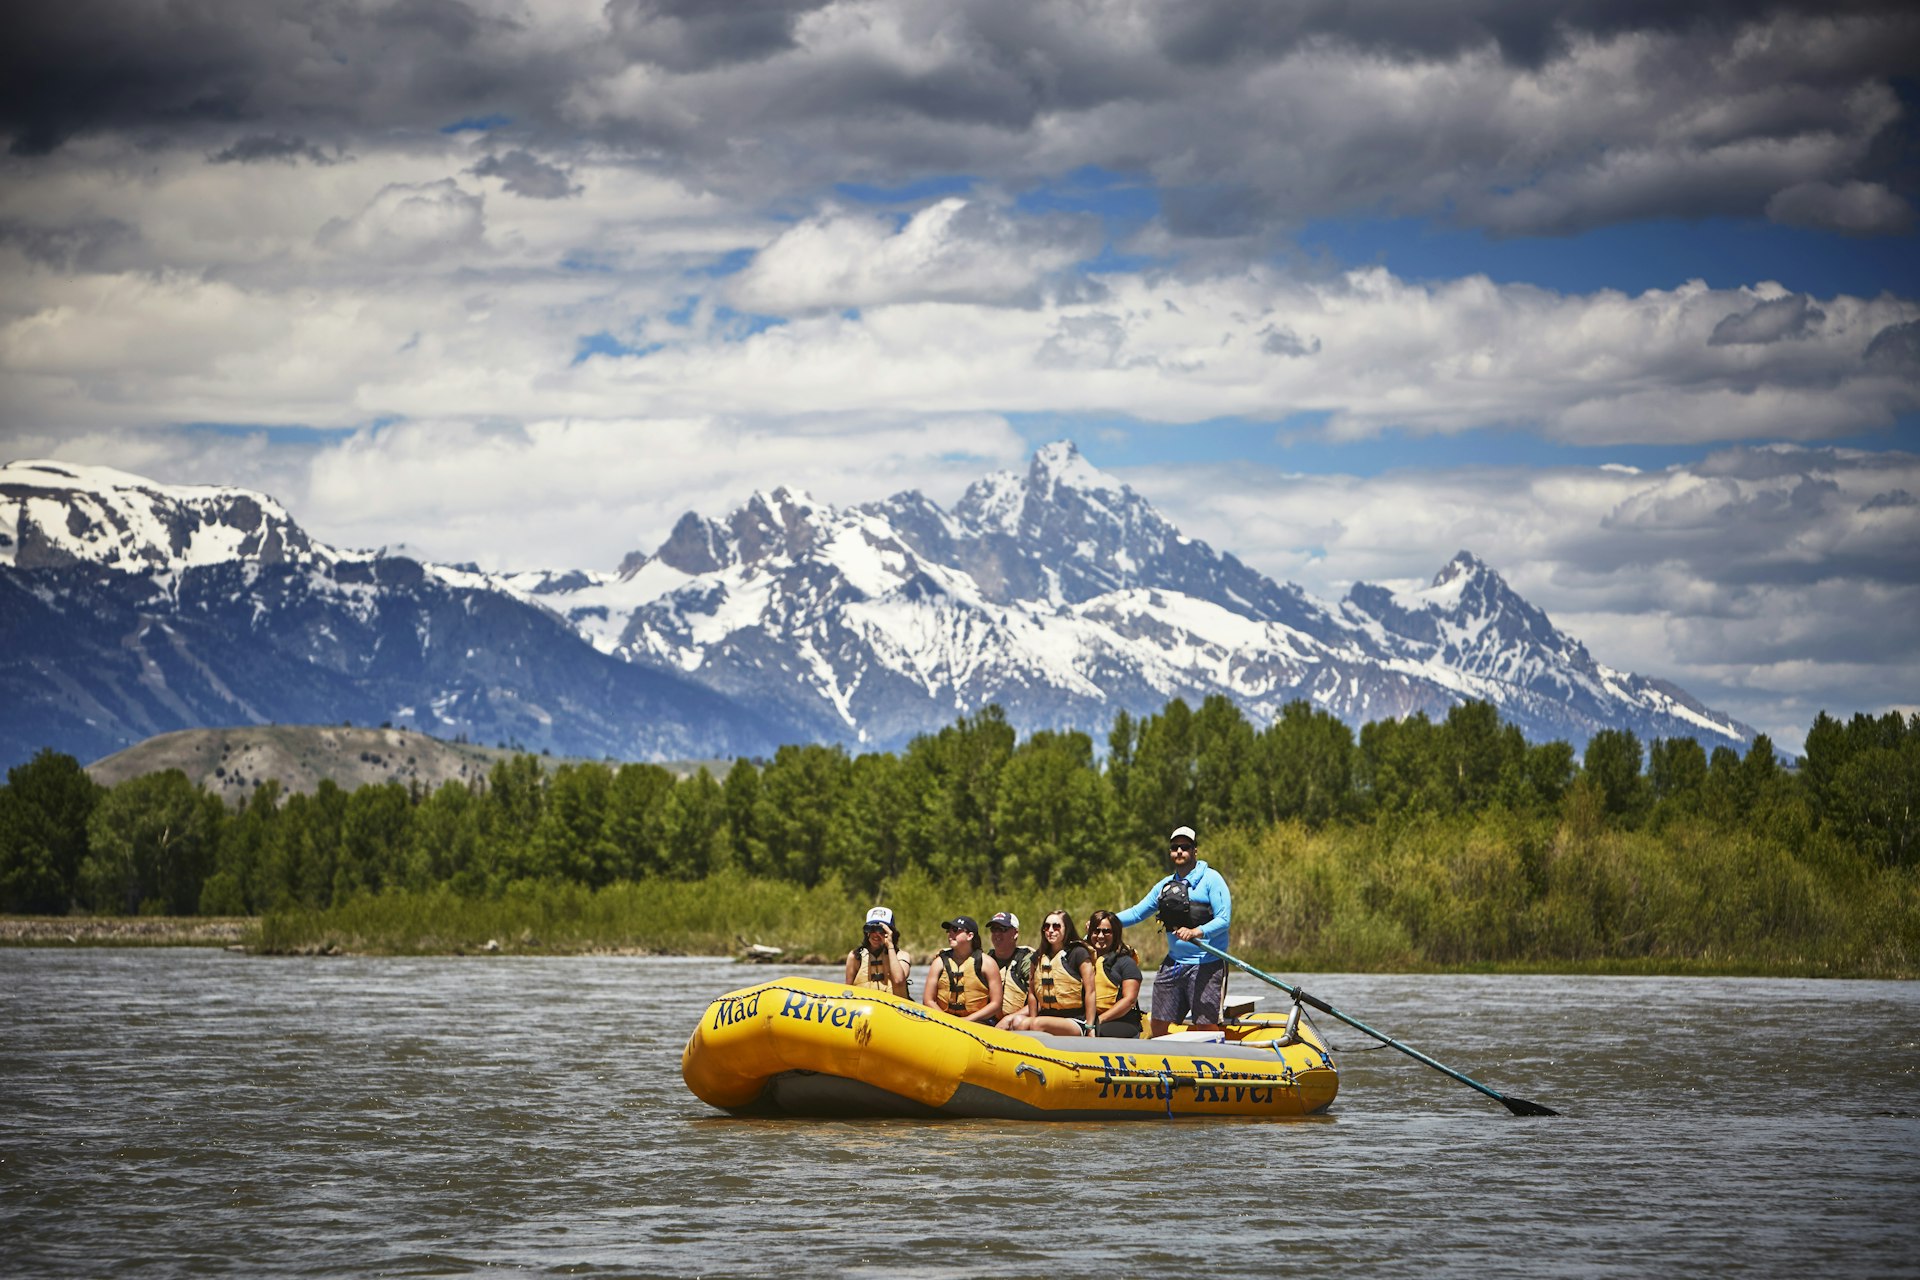 A guide paddles a raft with five passengers down the Snake River, with the Grand Tetons in the distance